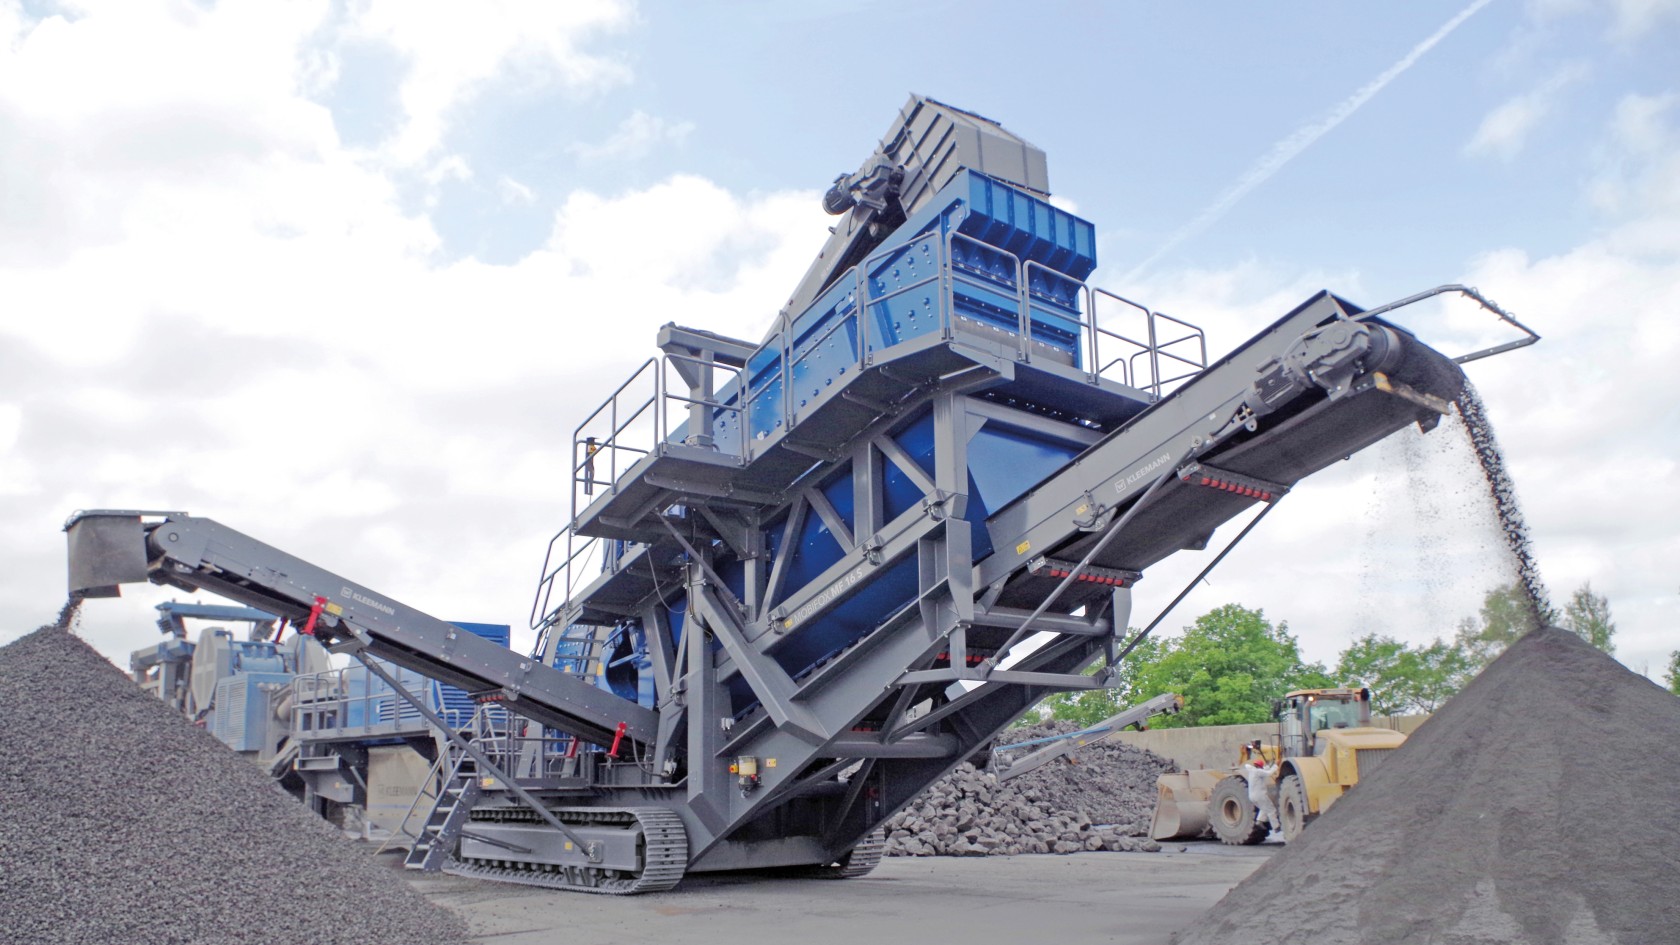 Mobile Impact Crusher Mf 16 S Impresses With High Throughput In Recycling Job Report Kleemann